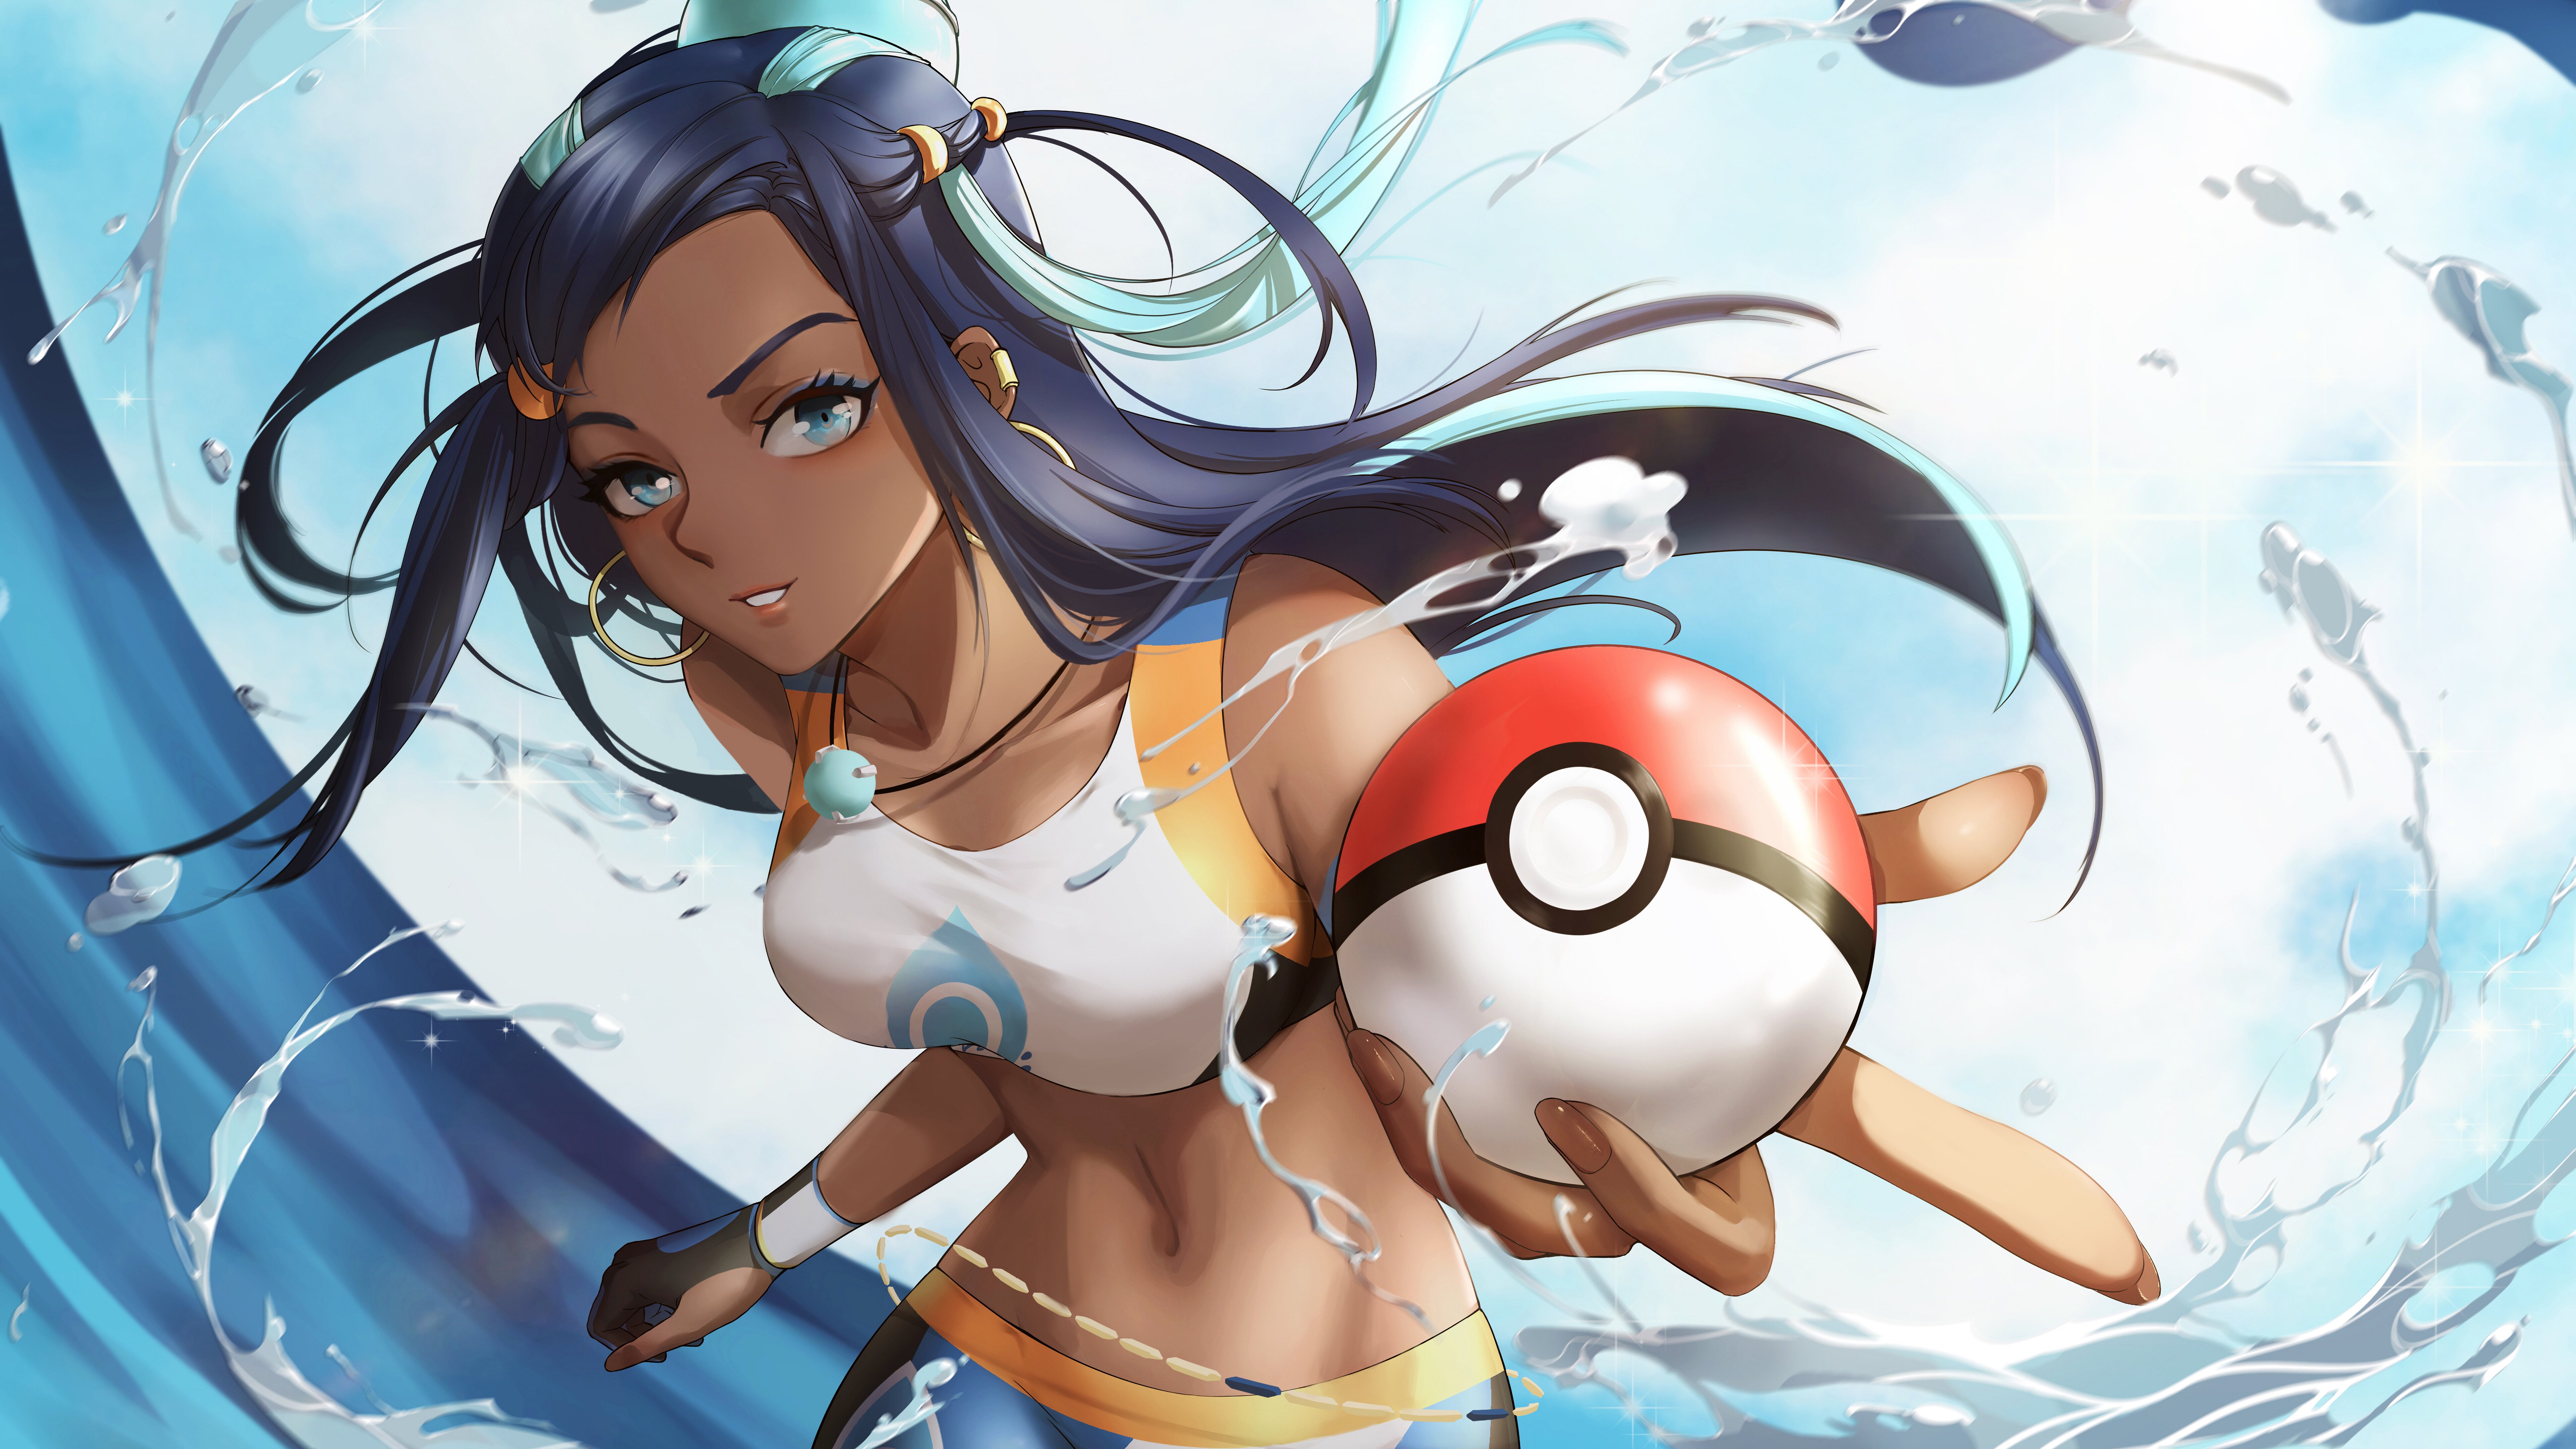 Anime Wallpaper Nessa with pokeball from Pokemon sword and shield